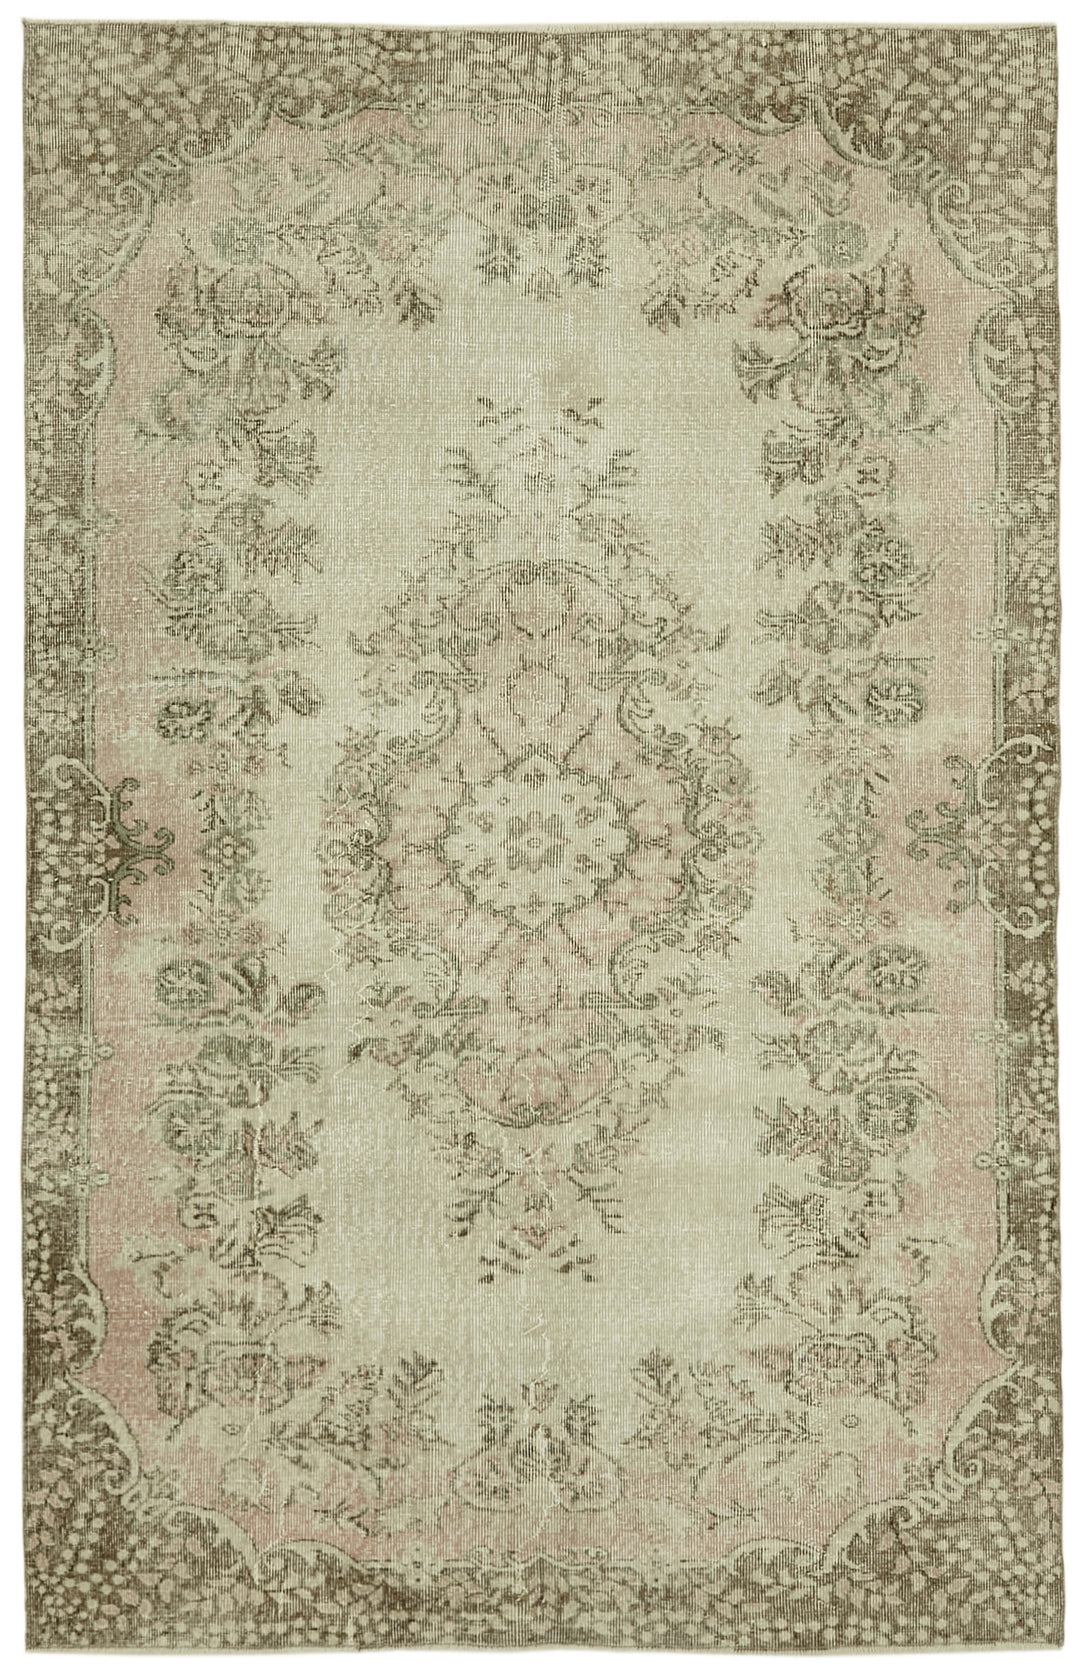 Handmade White Wash Area Rug > Design# OL-AC-41540 > Size: 5'-7" x 8'-7", Carpet Culture Rugs, Handmade Rugs, NYC Rugs, New Rugs, Shop Rugs, Rug Store, Outlet Rugs, SoHo Rugs, Rugs in USA